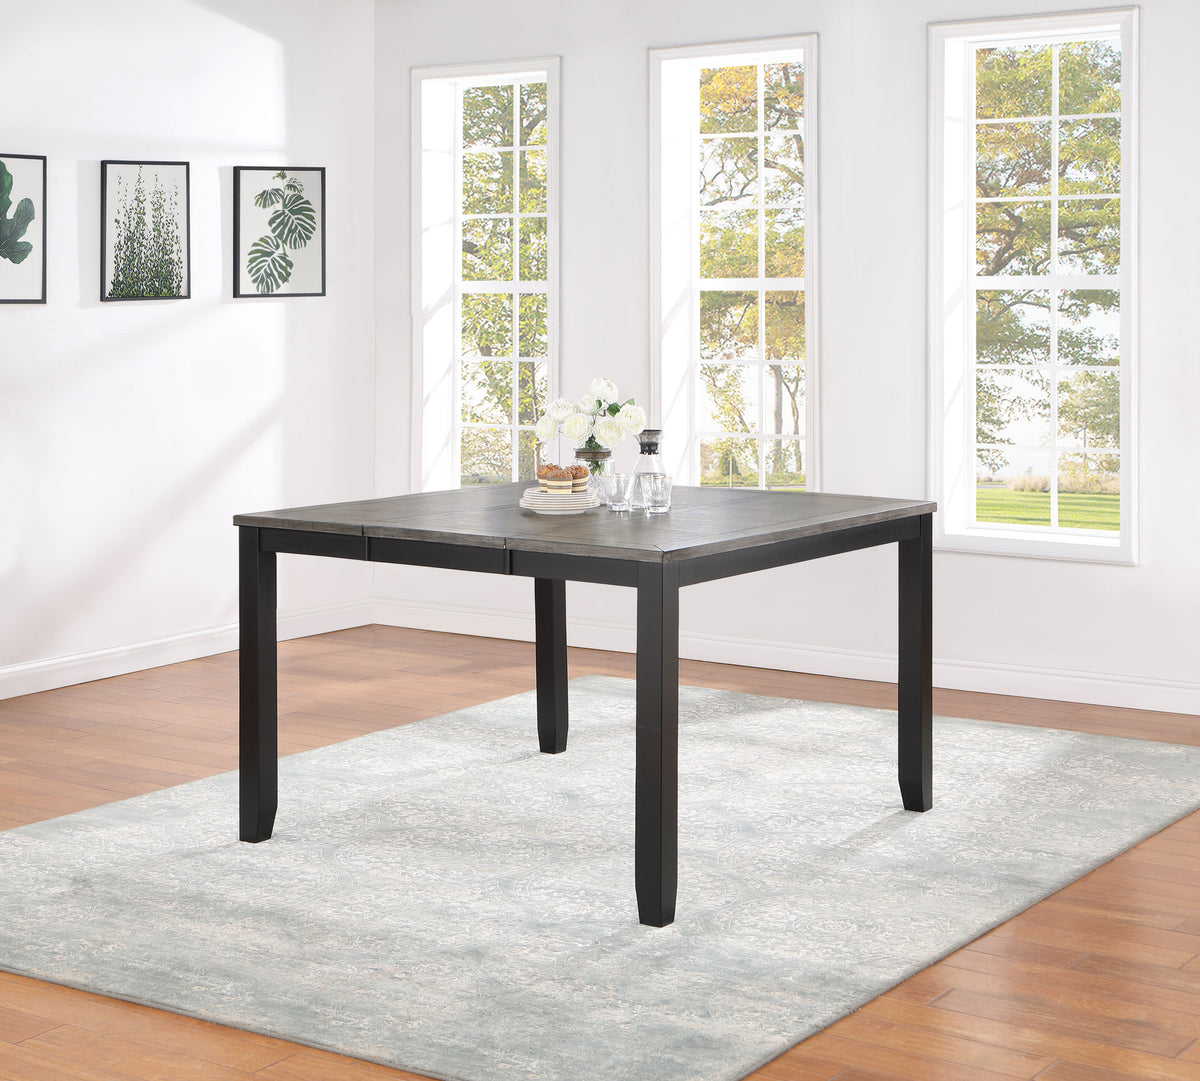 Elodie Counter Height Dining Table with Extension Leaf Grey and Black Elodie Counter Height Dining Table with Extension Leaf Grey and Black Half Price Furniture